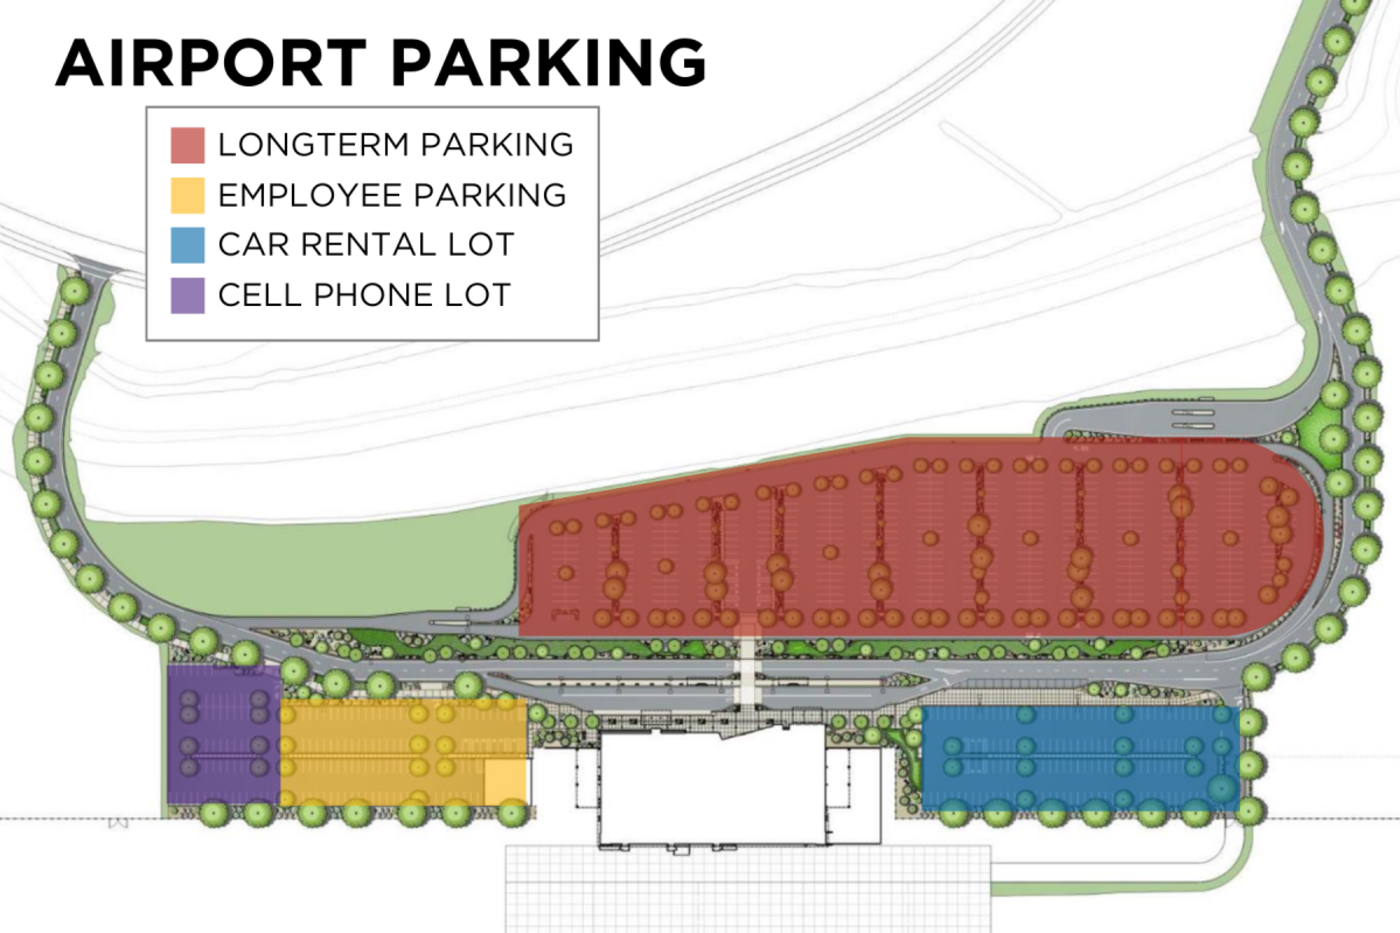 Provo Airport Parking Map